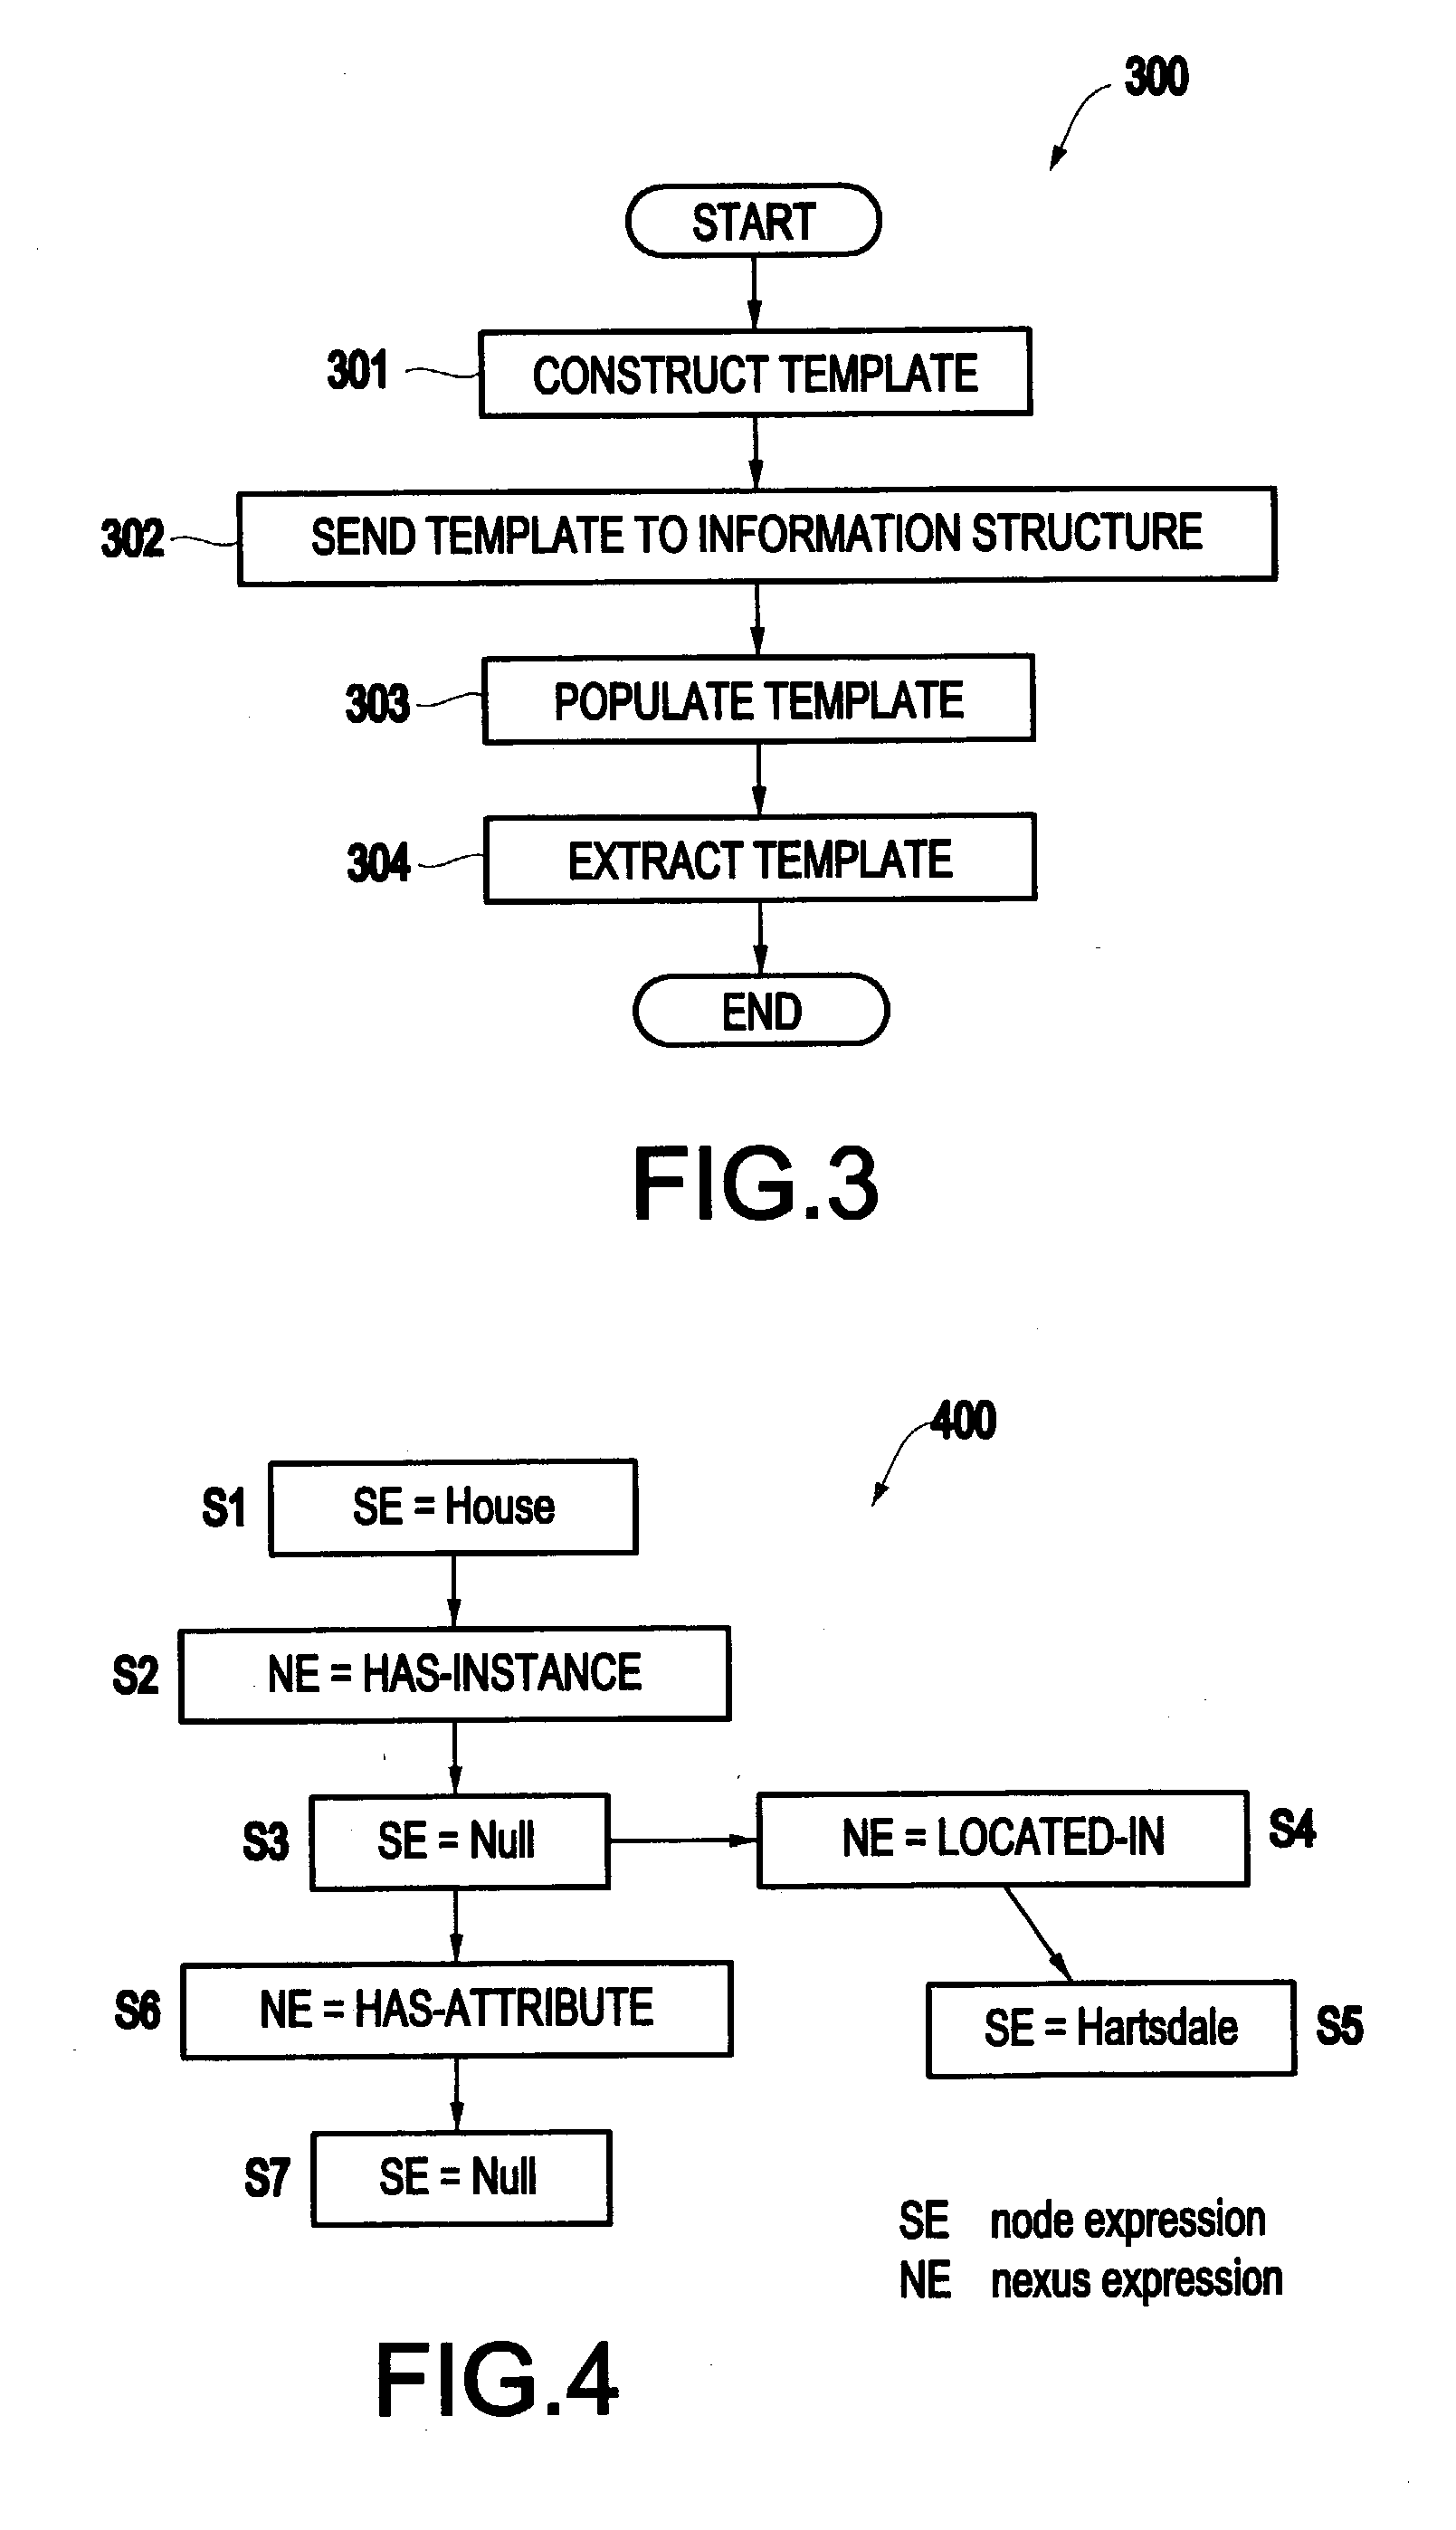 Method and structure for template-based data retrieval for hypergraph entity-relation information structures